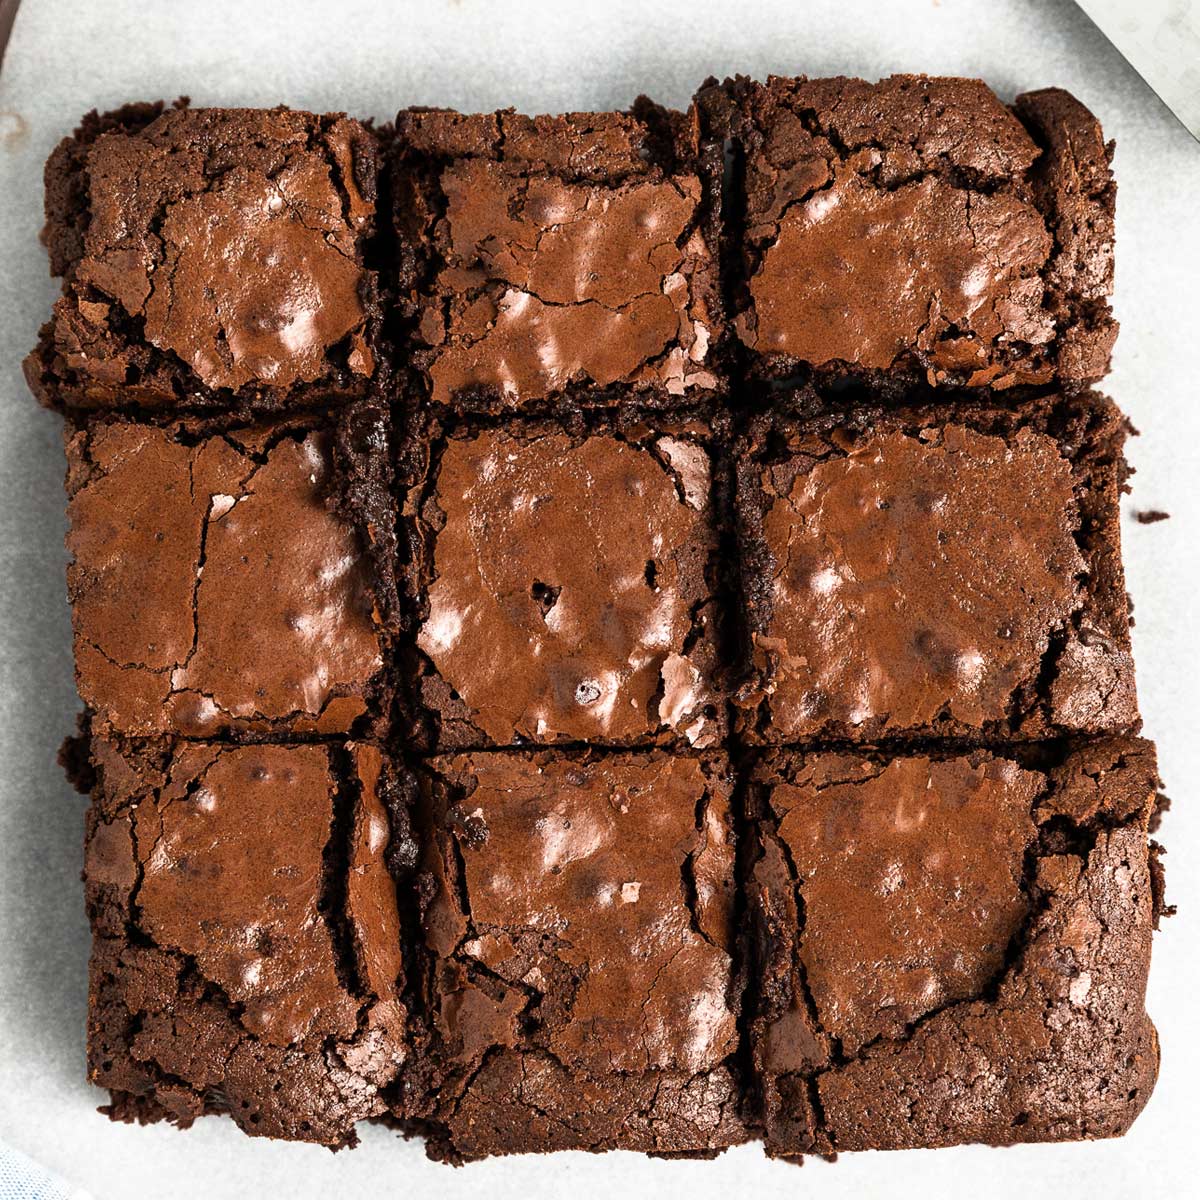 https://www.thechunkychef.com/wp-content/uploads/2021/02/Classic-Fudgy-Brownies-1200.jpg